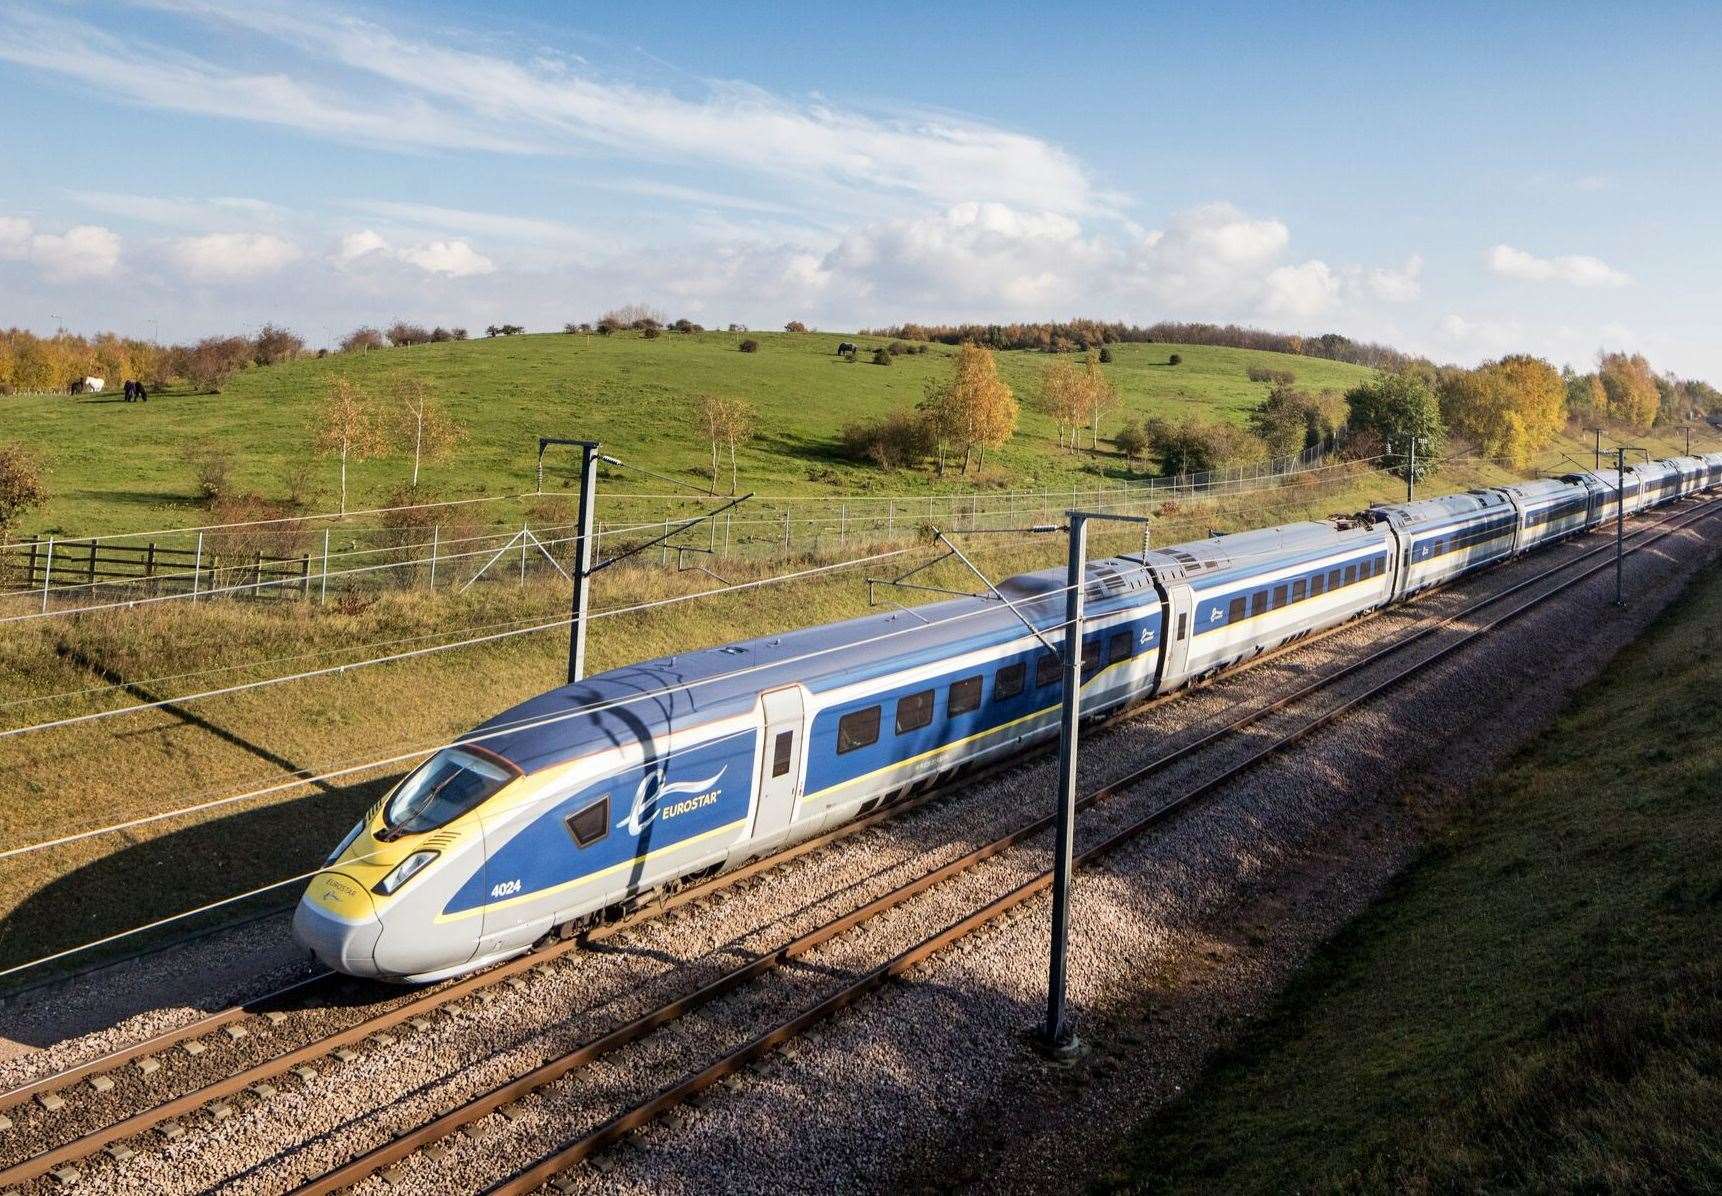 Eurostar trains currently do not call at stations in Kent